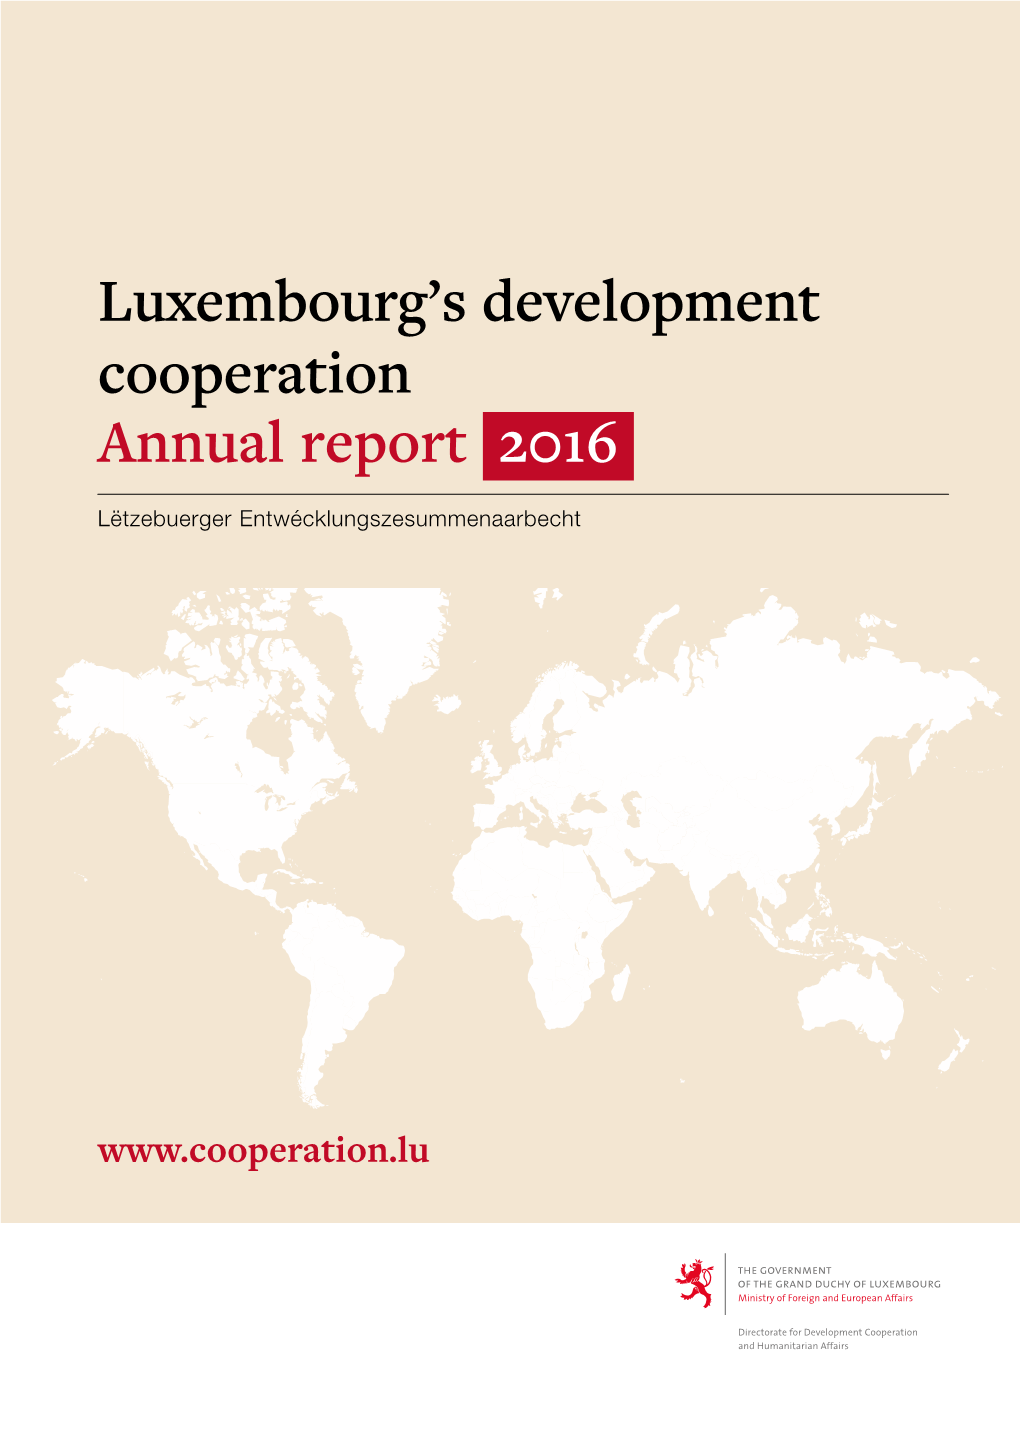 Luxembourg's Development Cooperation Annual Report 2016